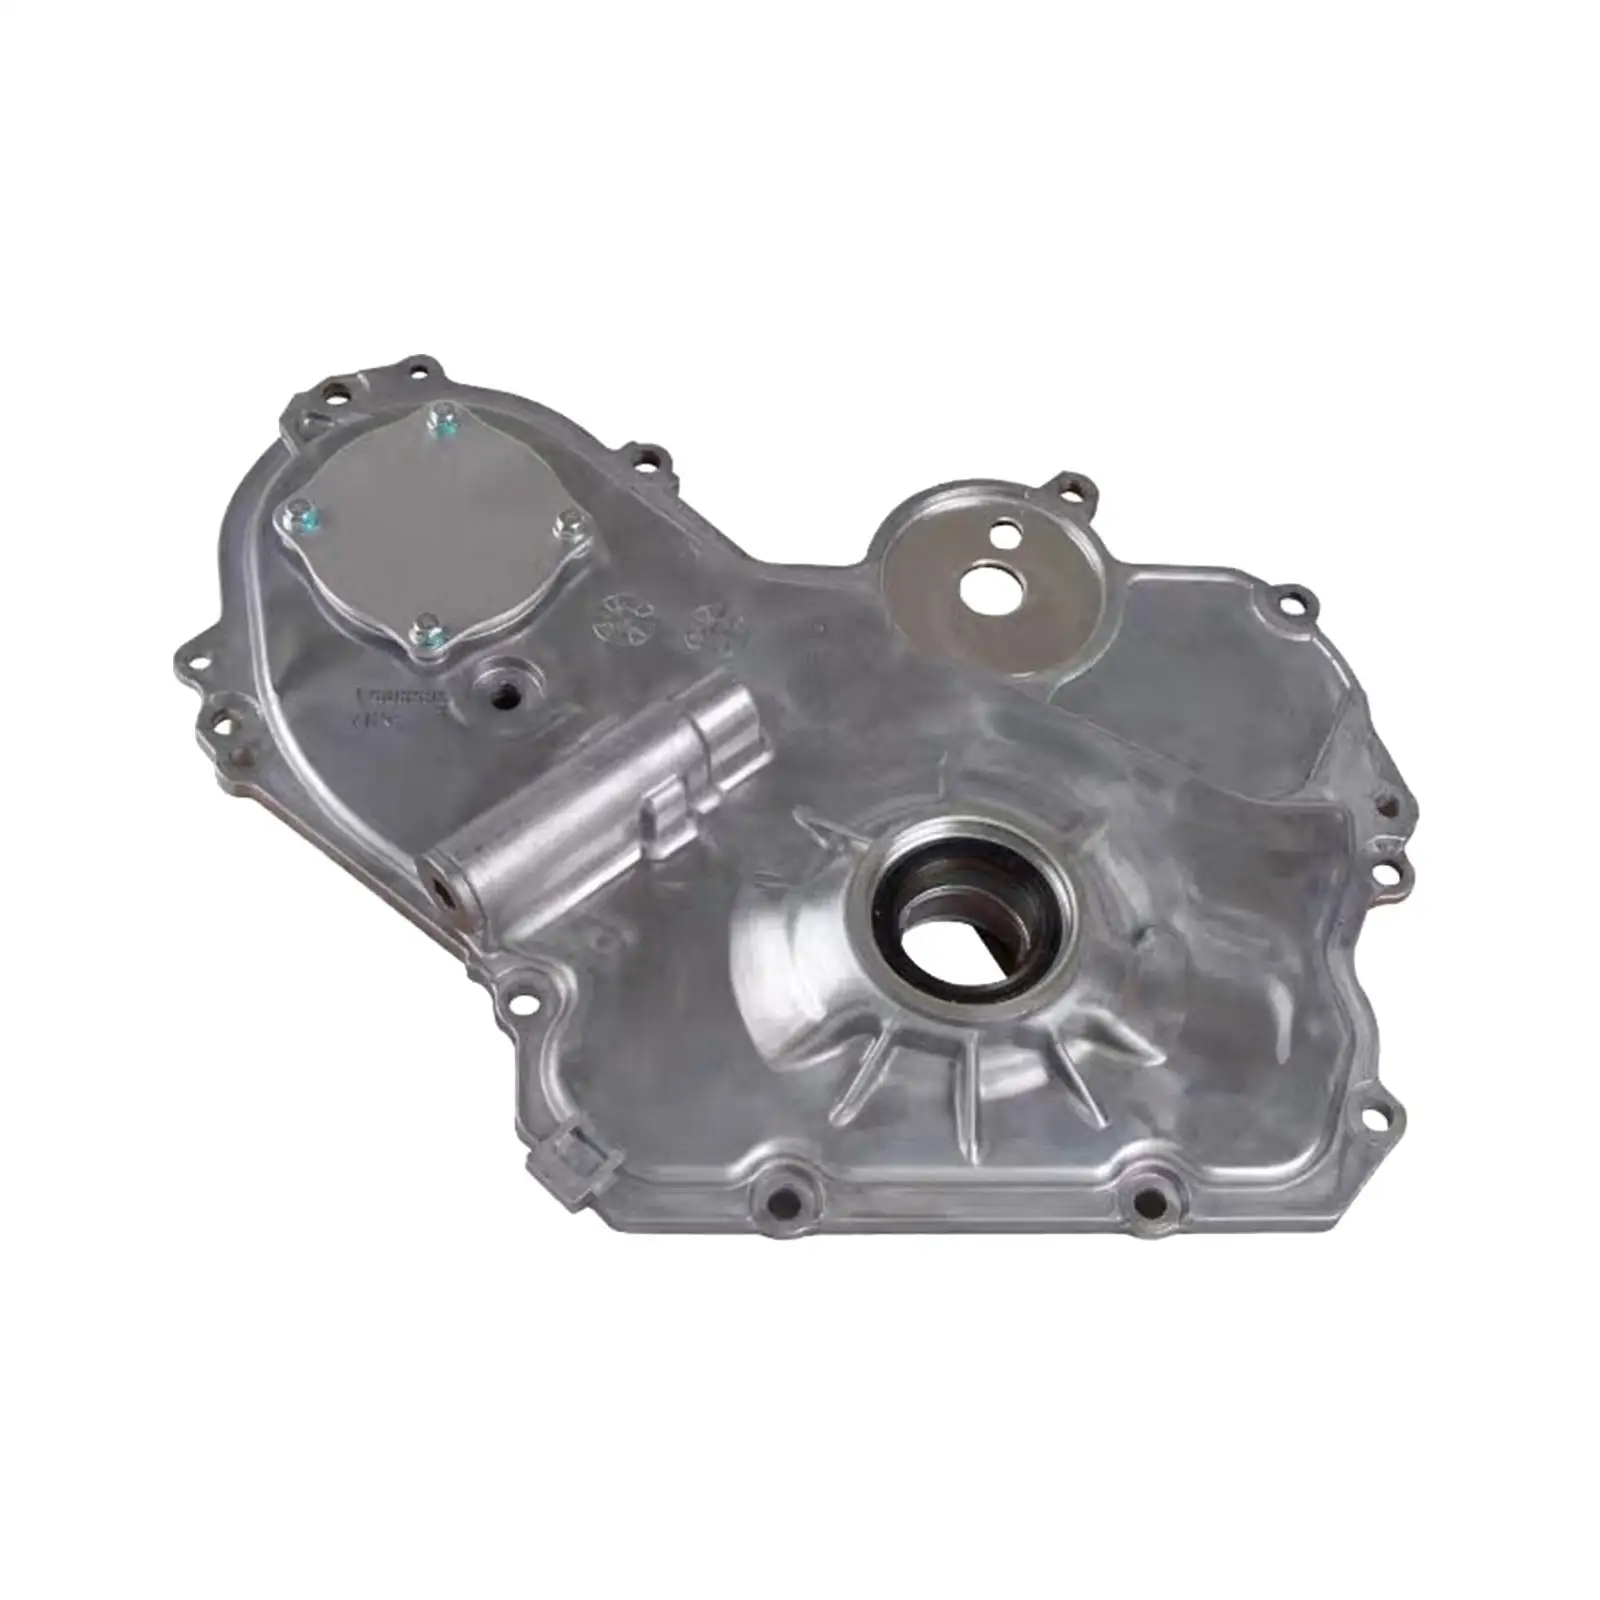 Engine Oil Pump Repair Parts 90537914 12584621 12606580 12637040 for Buick